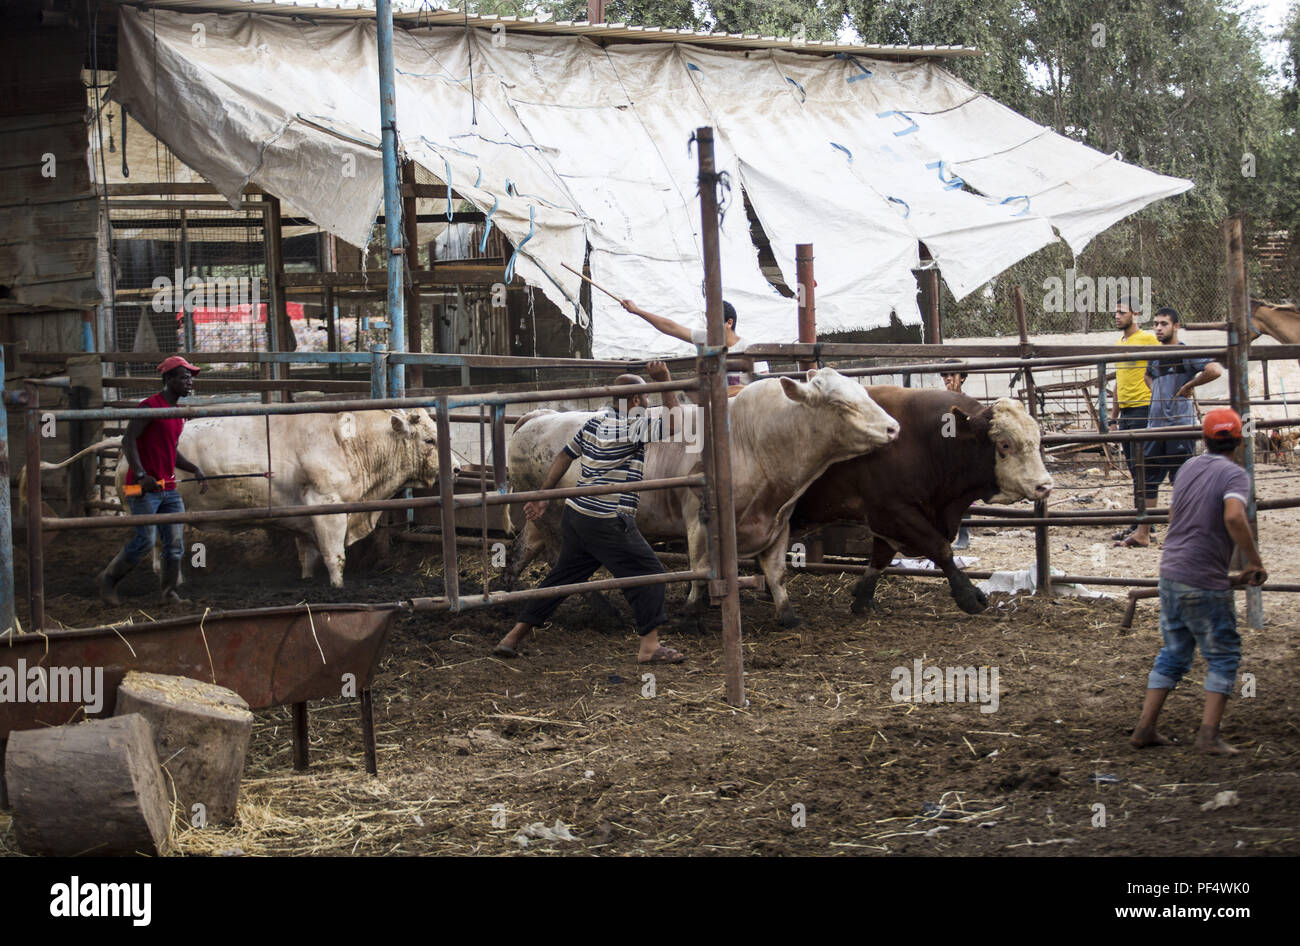 Gaza City, The Gaza Strip, Gaza. 18th Aug, 2018. Farmers seen getting the cows out to be displayed to the customers.Palestinians gather in a cattle shop to purchase cattles to be sacrificed. before Eid al-Adha in the east of Jabalya refugee camp. Eid al-Adha (Festival of Sacrifice) is celebrated throughout the Islamic world as the commemoration of Abraham's will to sacrifice his son for God, cows, camels, goats and sheep are traditionally slaughtered on the Holy Day. Credit: Mahmoud Issa/SOPA Images/ZUMA Wire/Alamy Live News Stock Photo